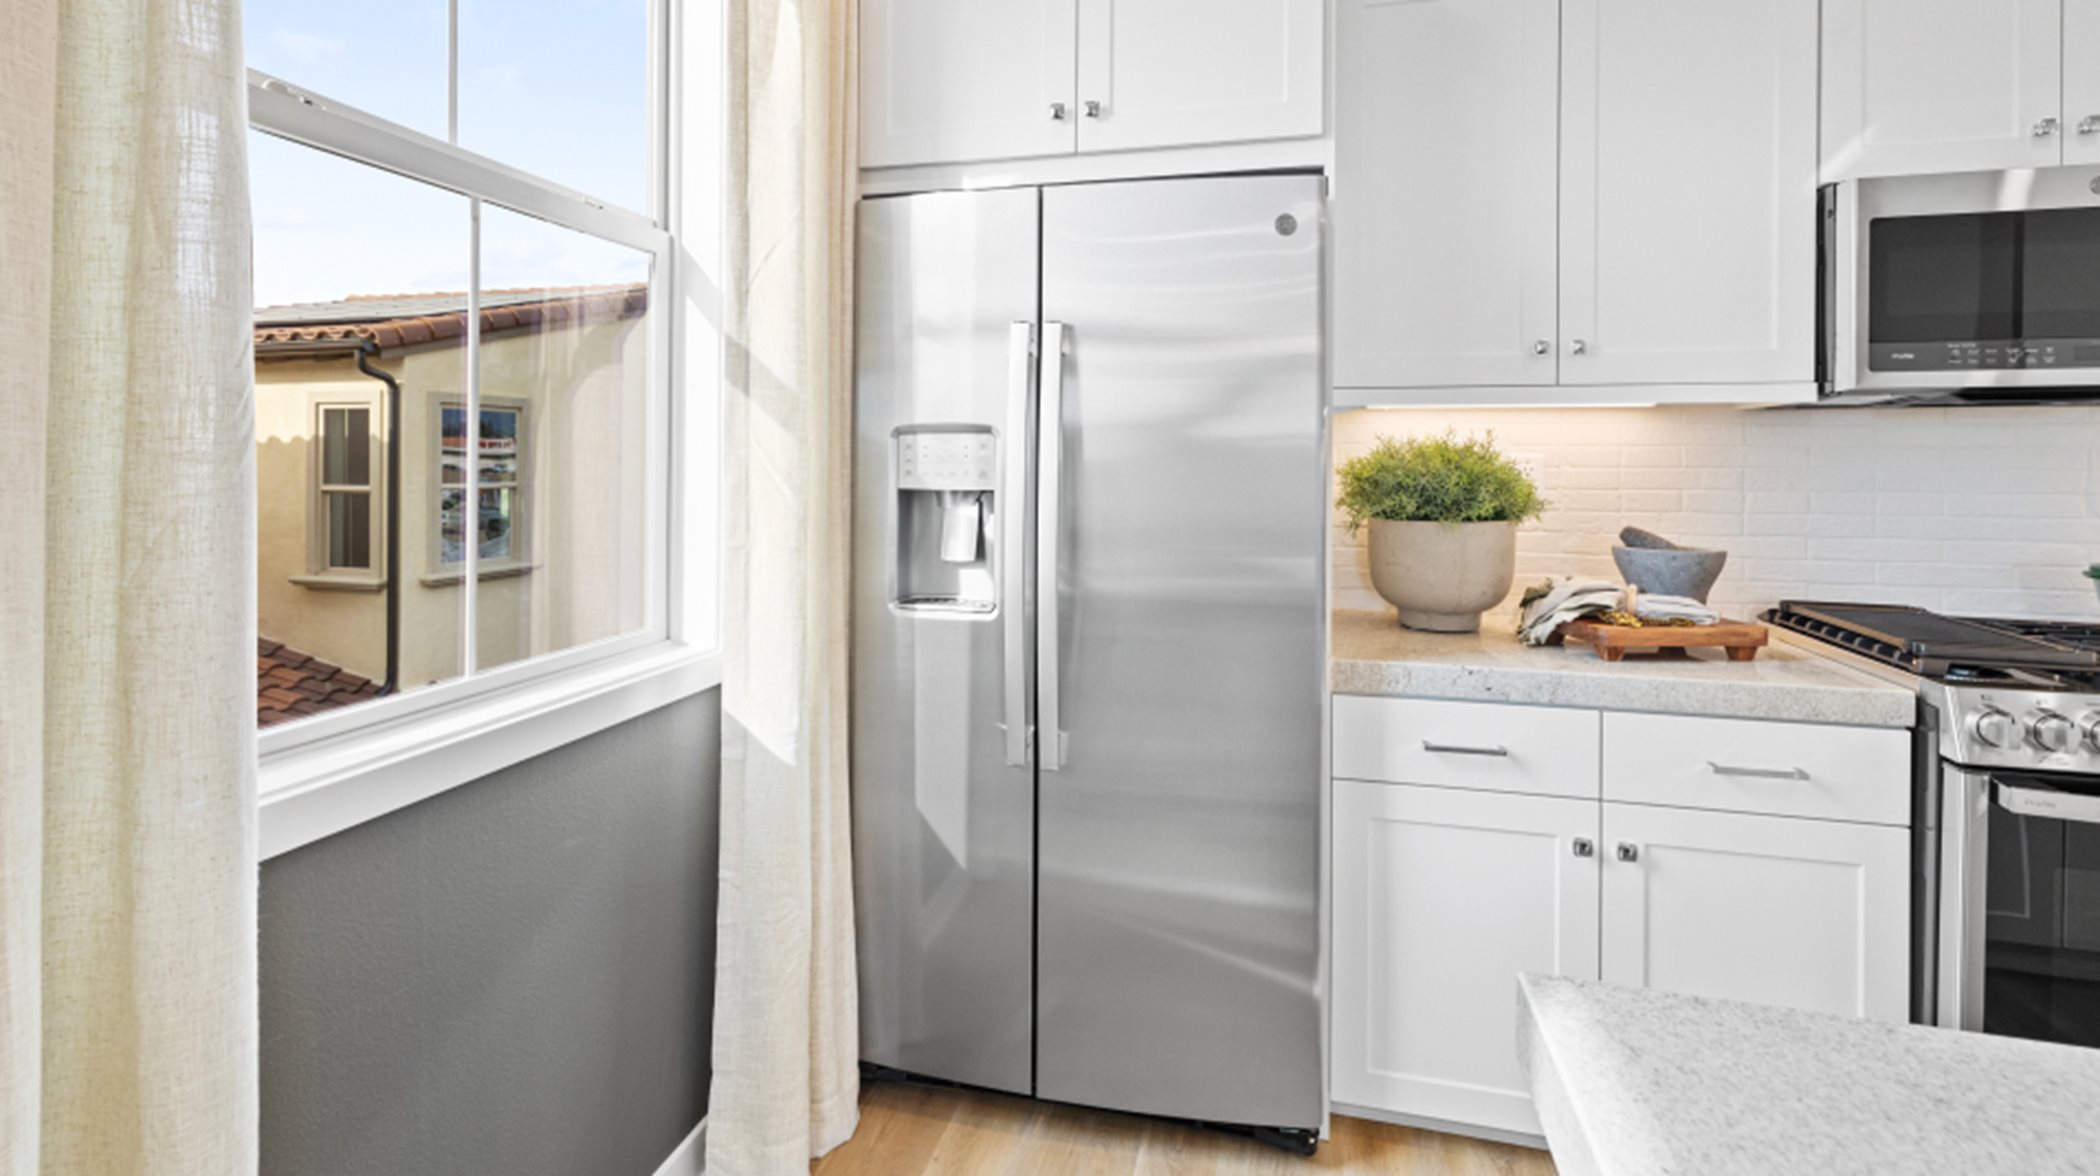 Image of kitchen with a focus on the fridge